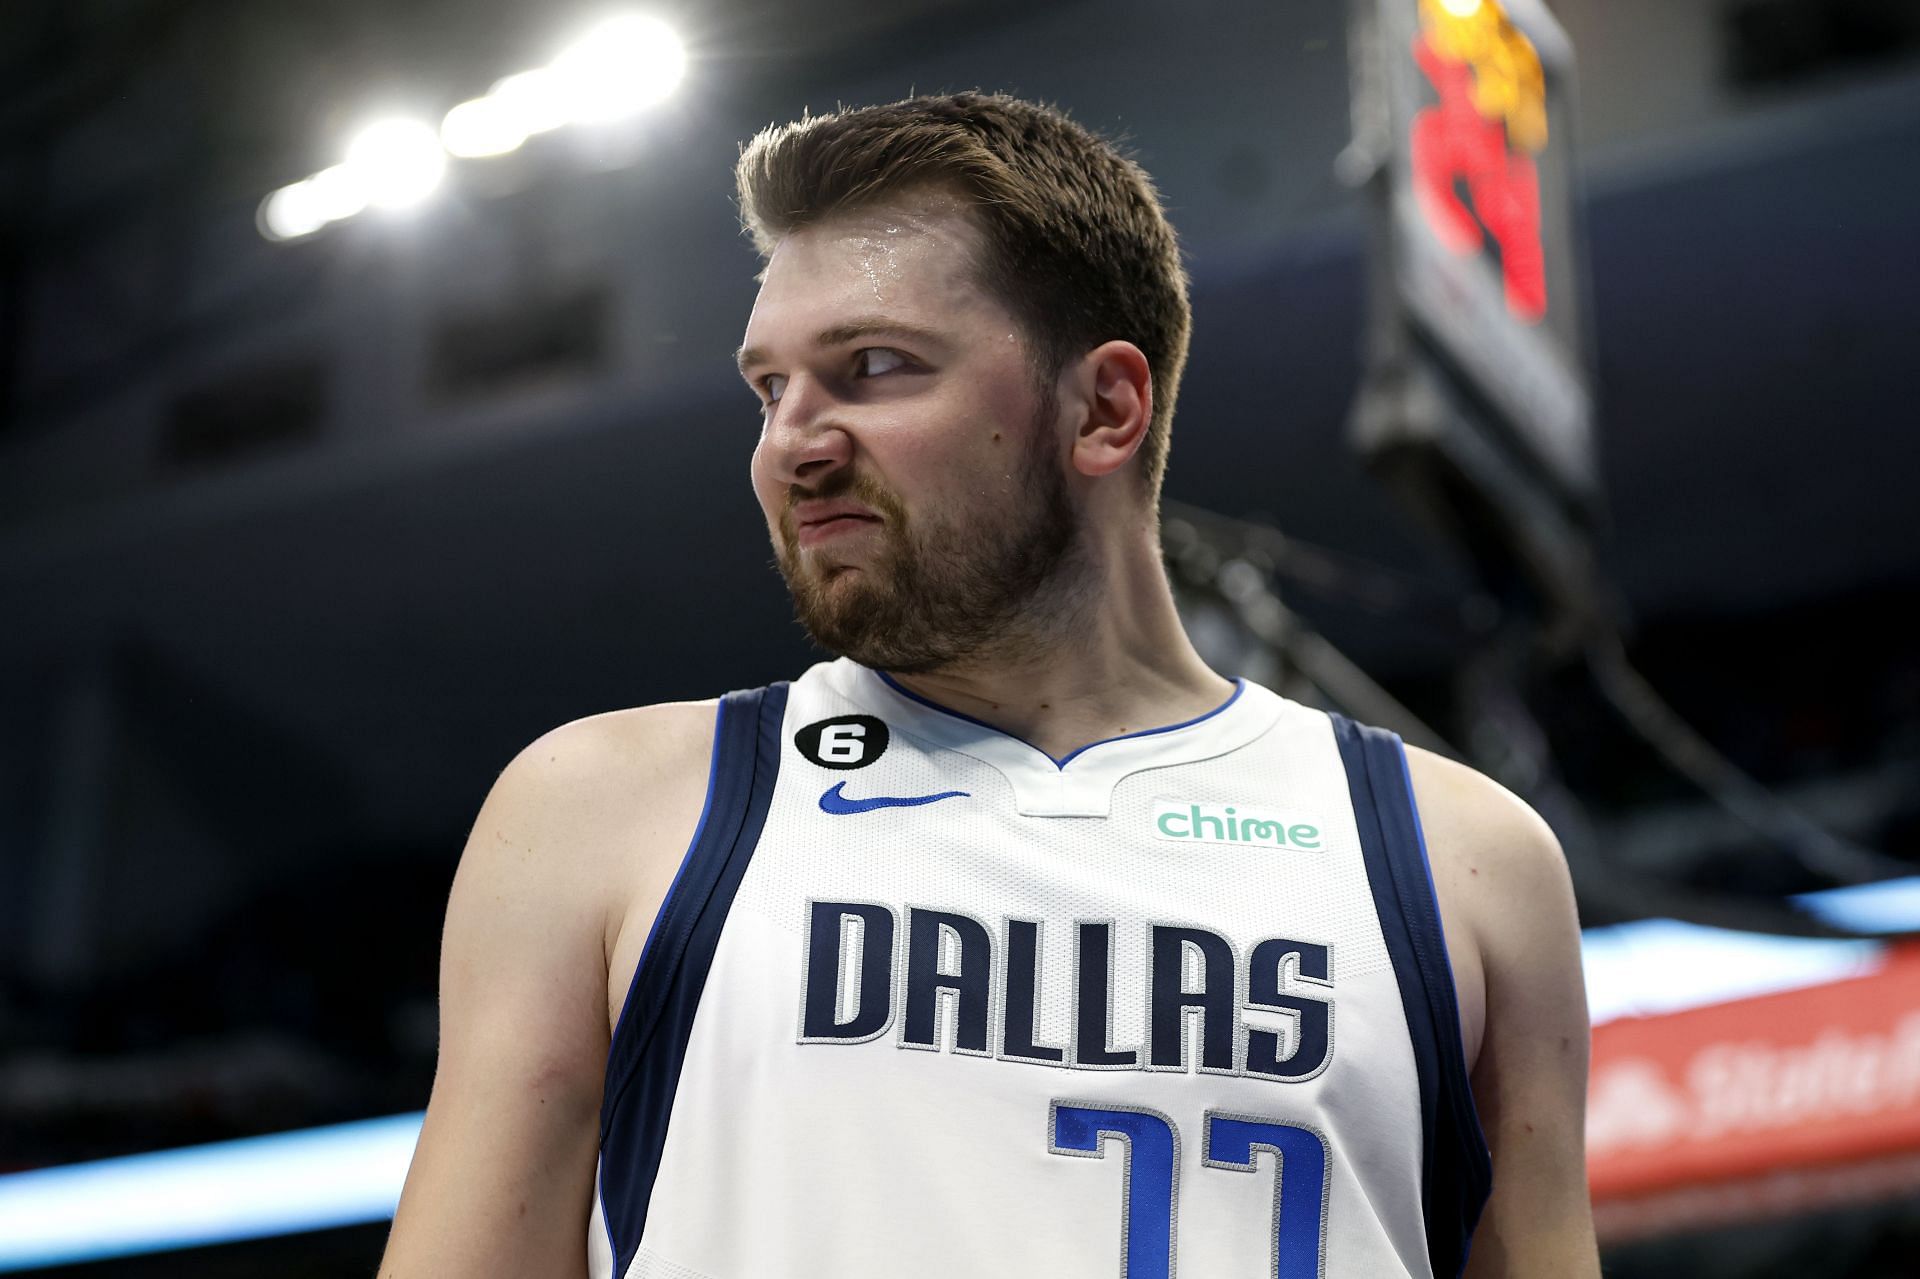 Luka Doncic has turned the Mavs into one of the best NBA teams (Image via Getty Images)